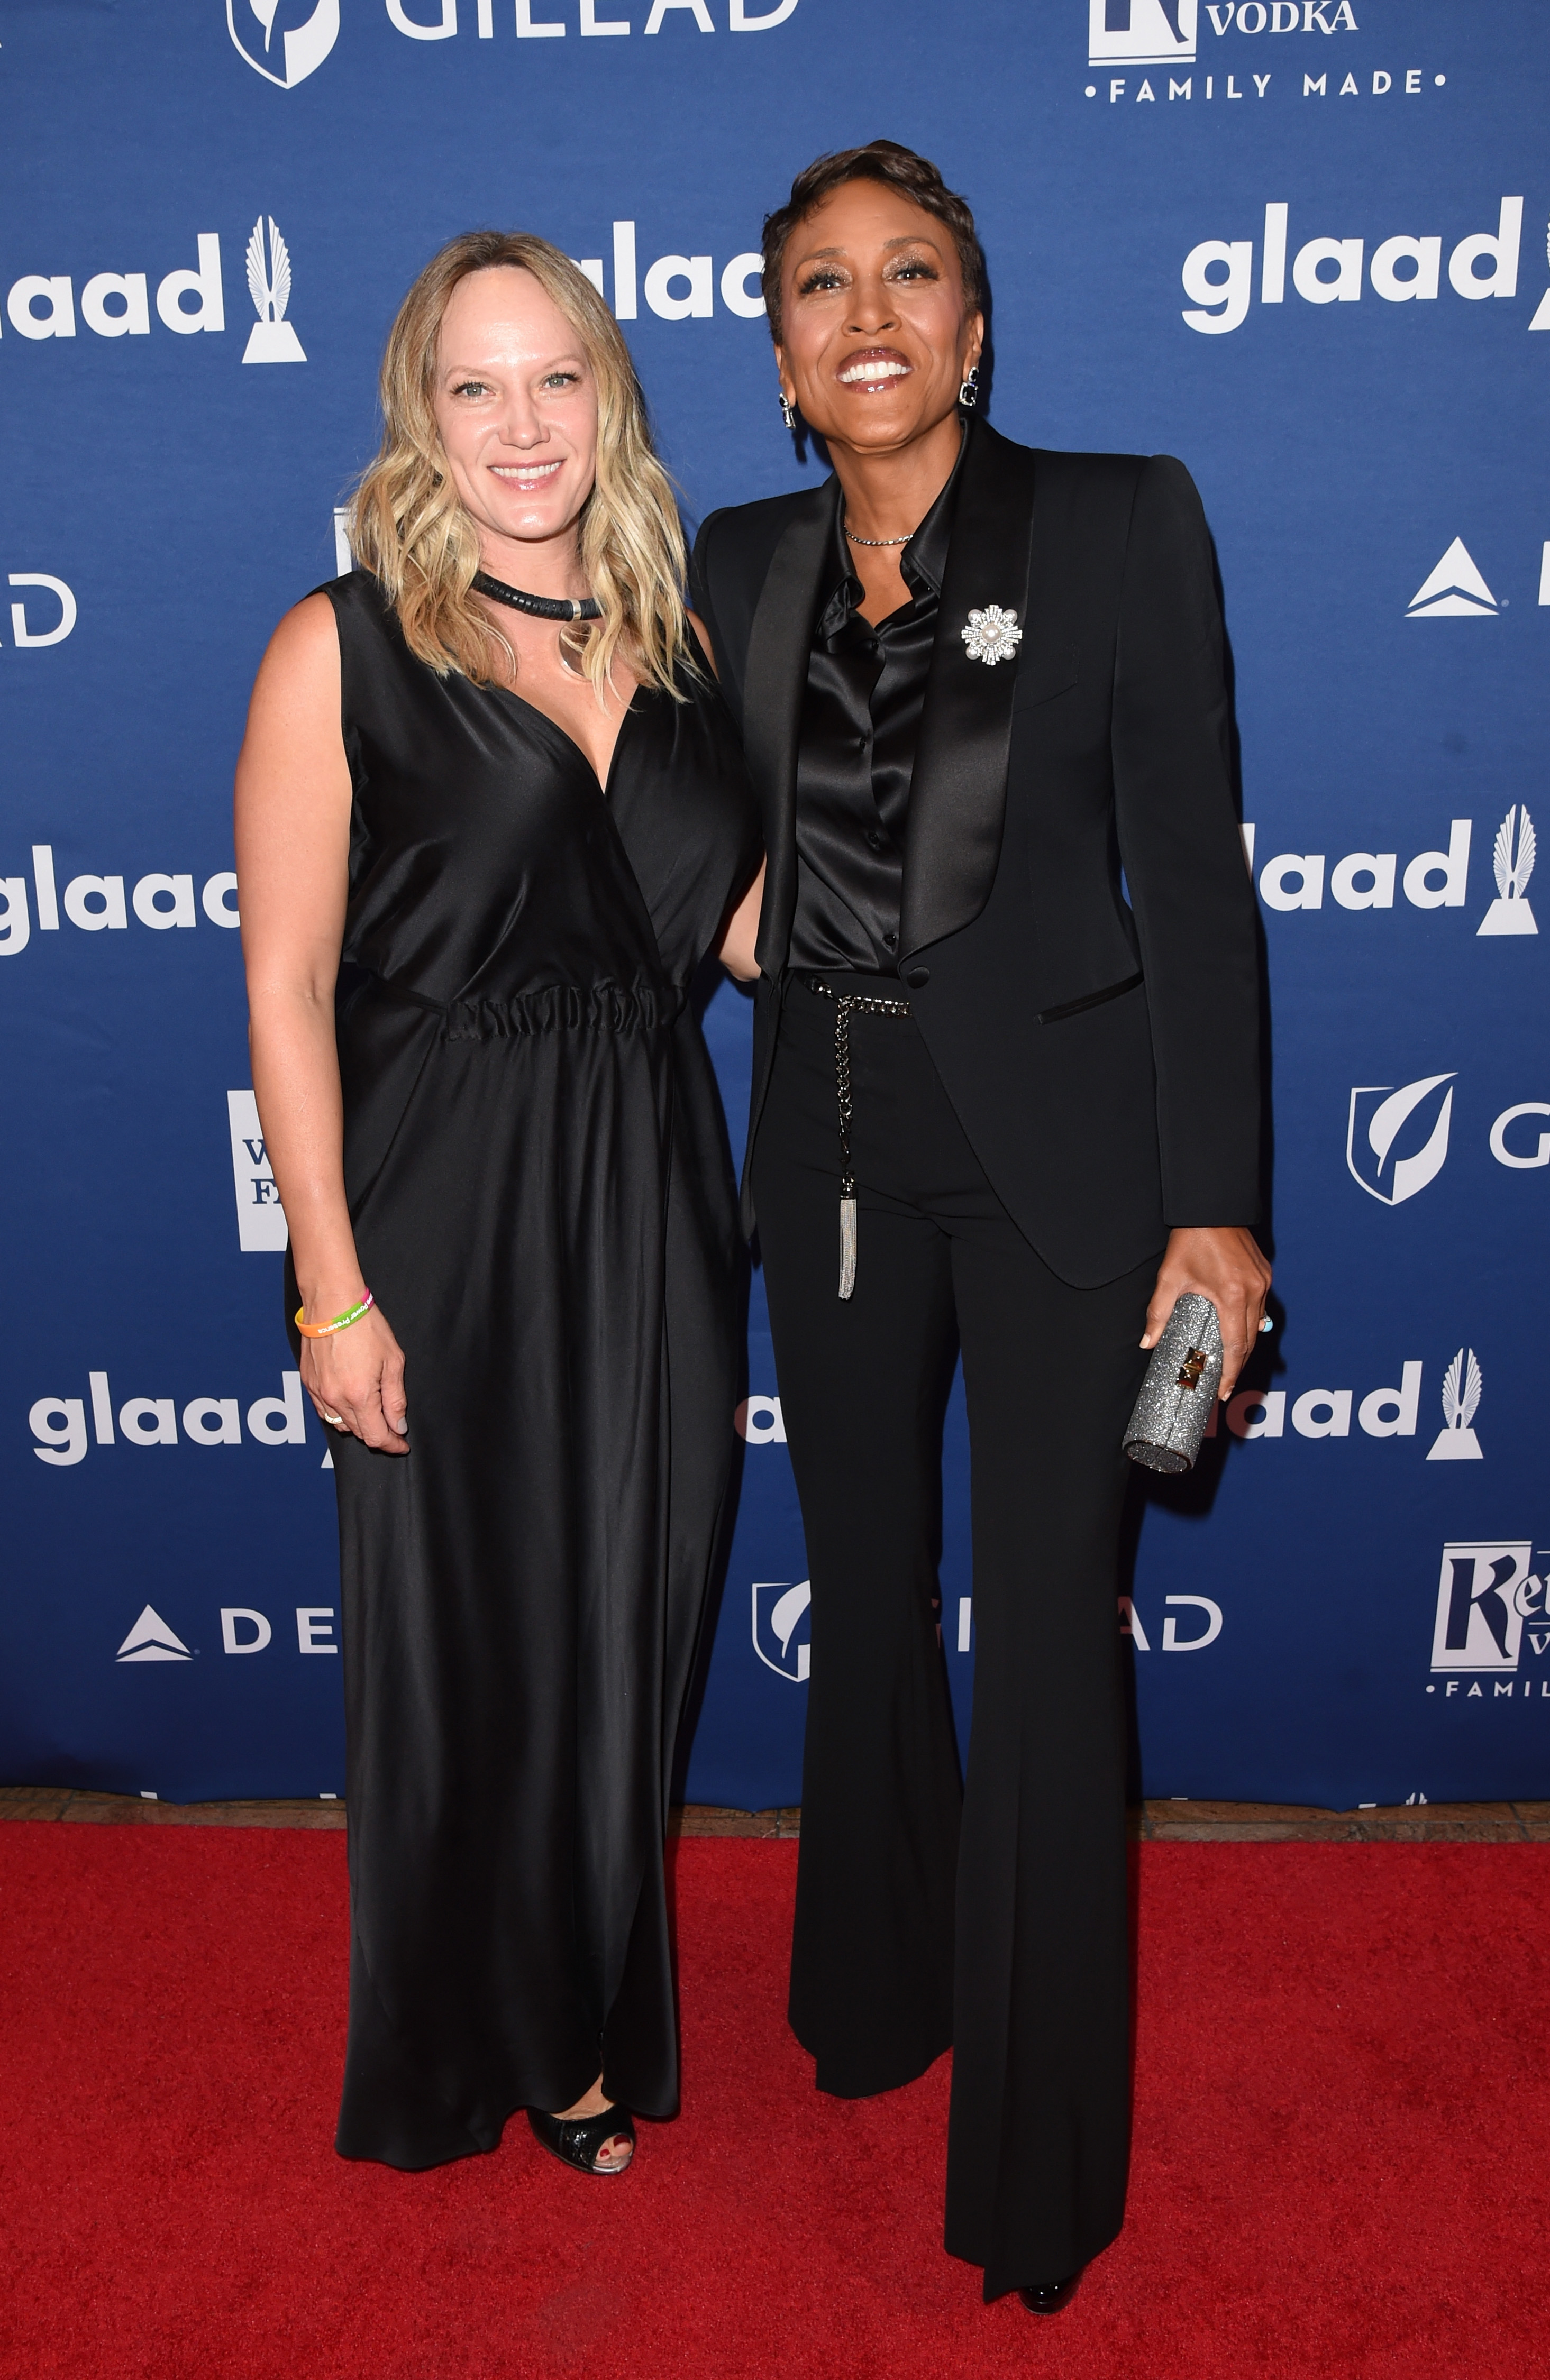 Amber Laign und Robin Roberts bei den 29th Annual GLAAD Media Awards in New York City, 2018 | Quelle: Getty Images